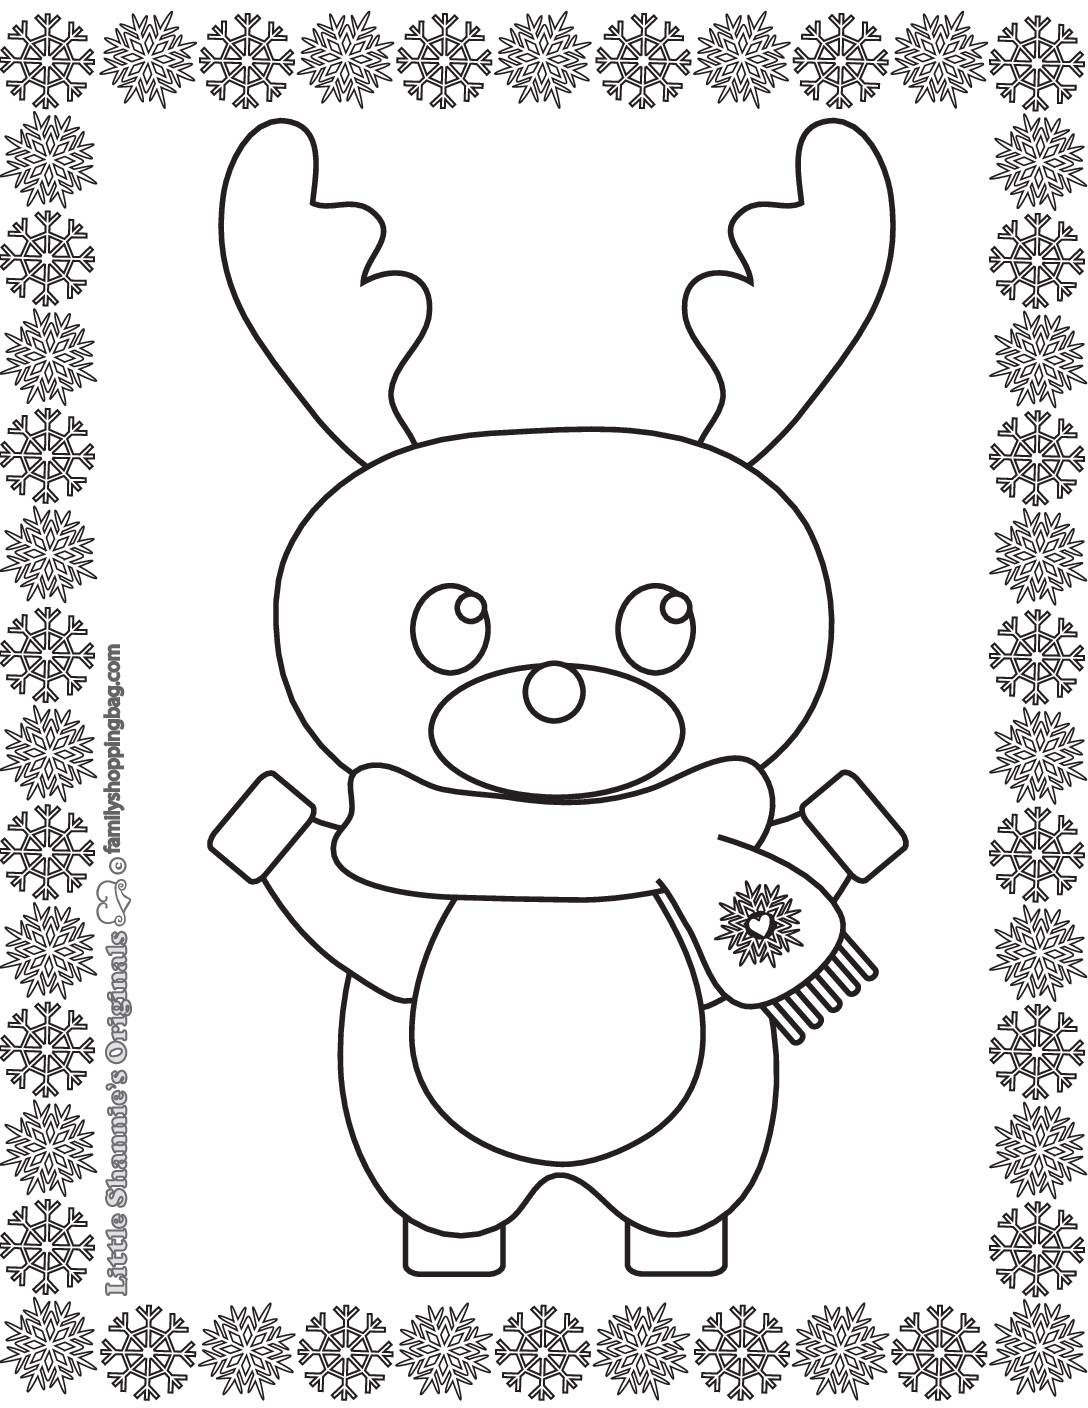 Coloring Page 2 Christmas Coloring Pages